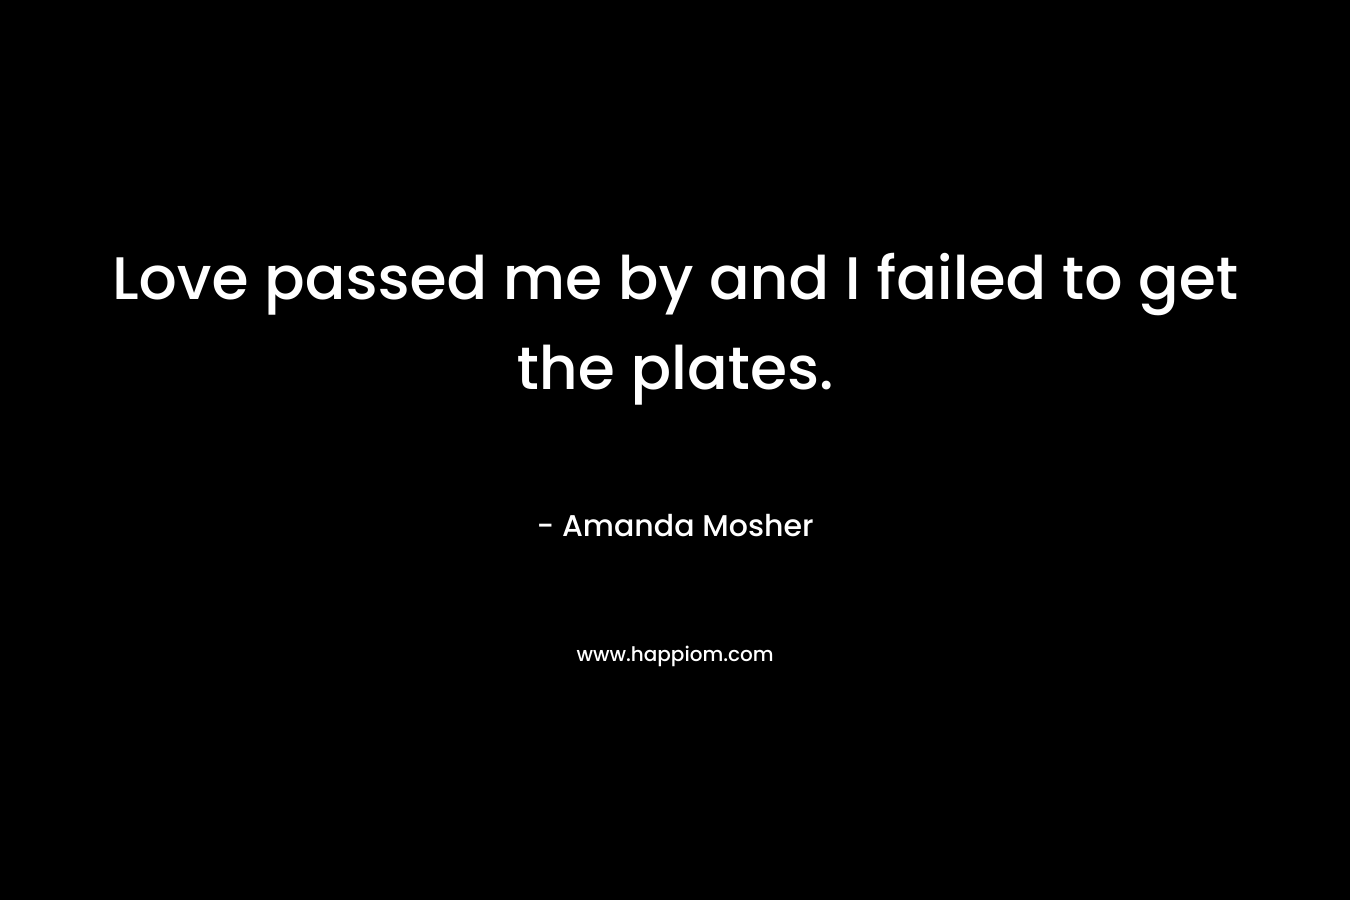 Love passed me by and I failed to get the plates. – Amanda Mosher